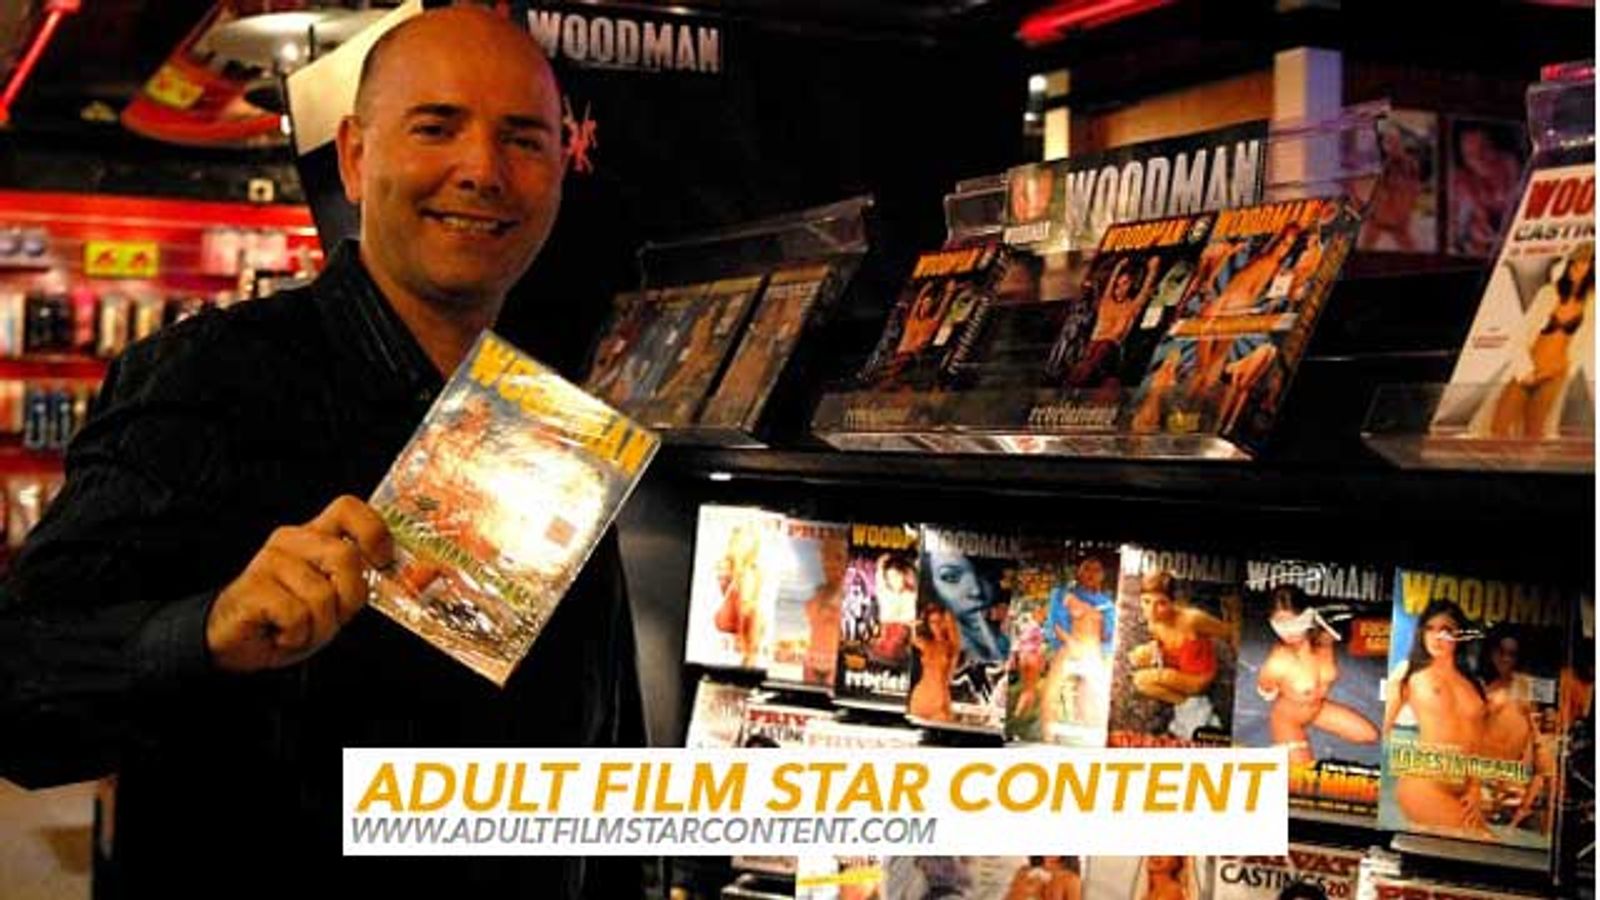 Adult Film Star Content Acquires Woodman Entertainment Library